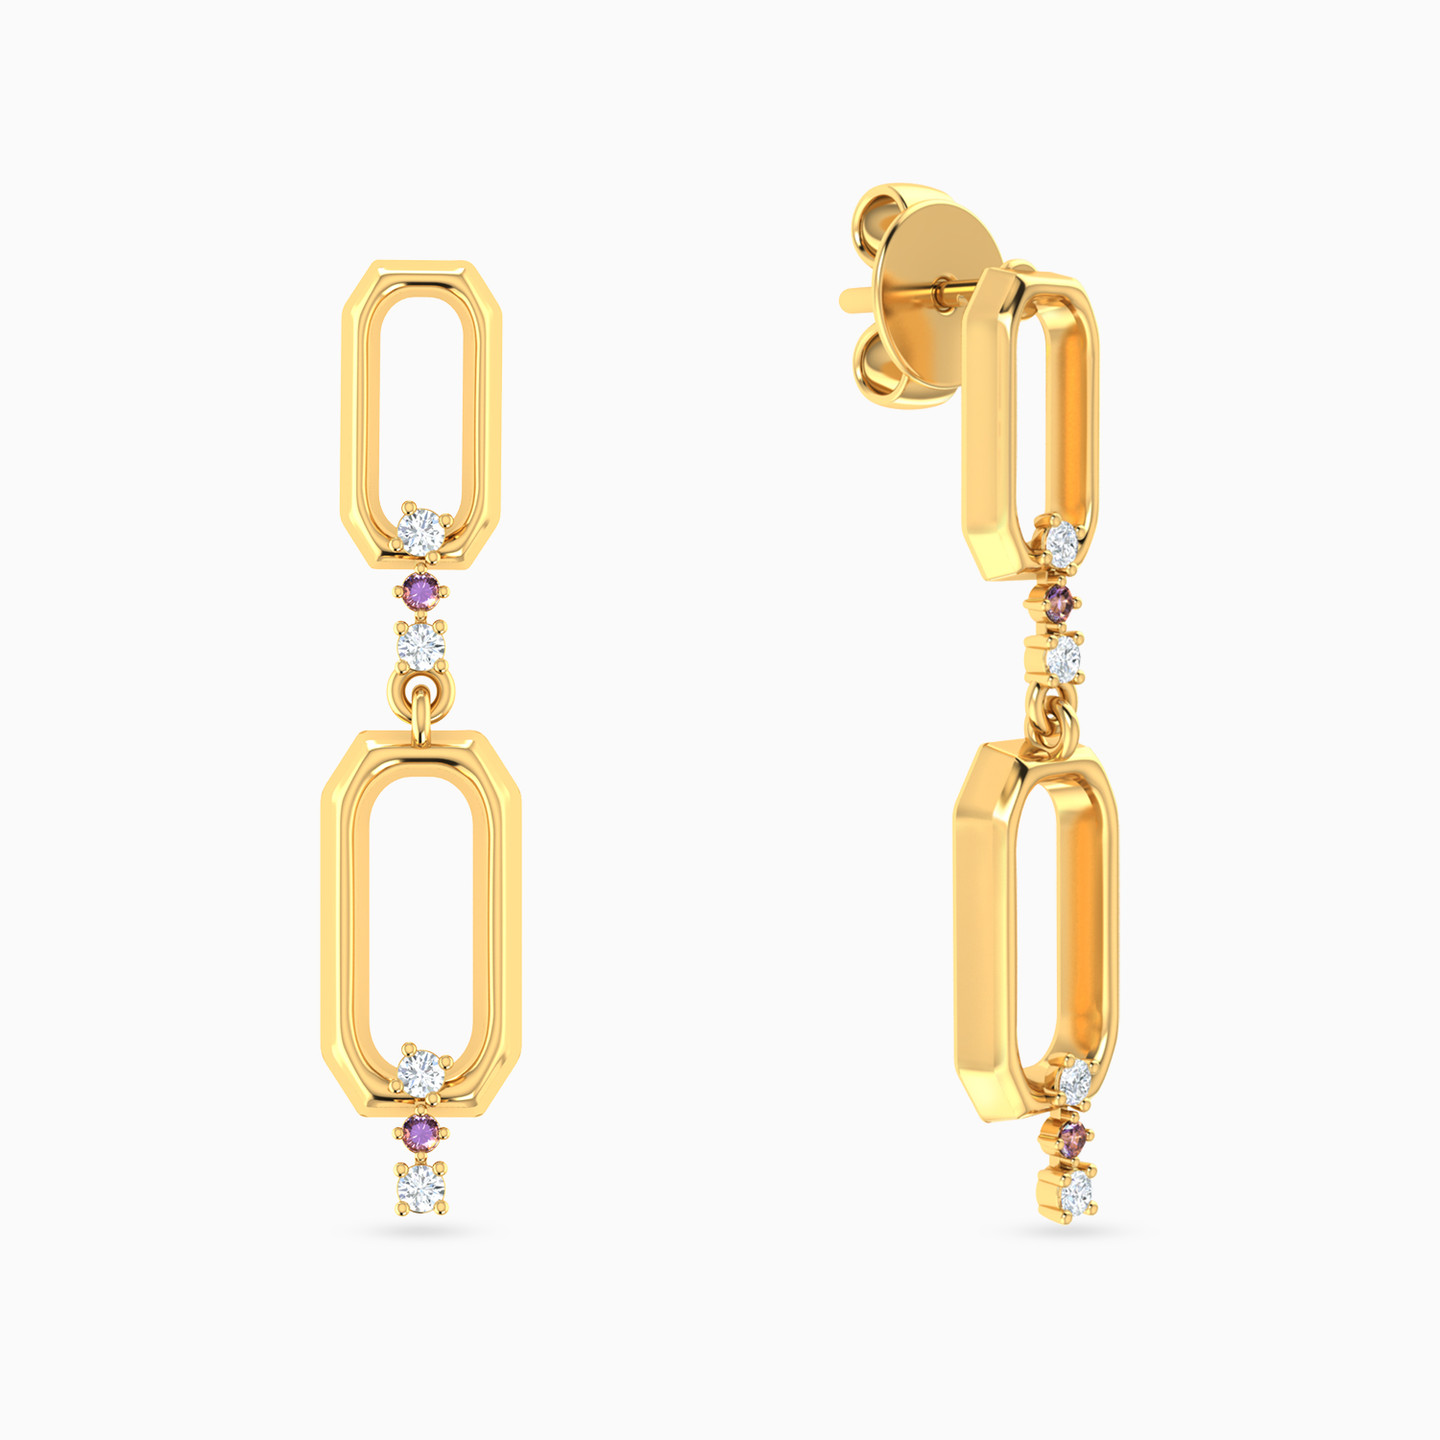 Rectangle Shaped Colored Stones Drop Earrings in 18K Gold - 2